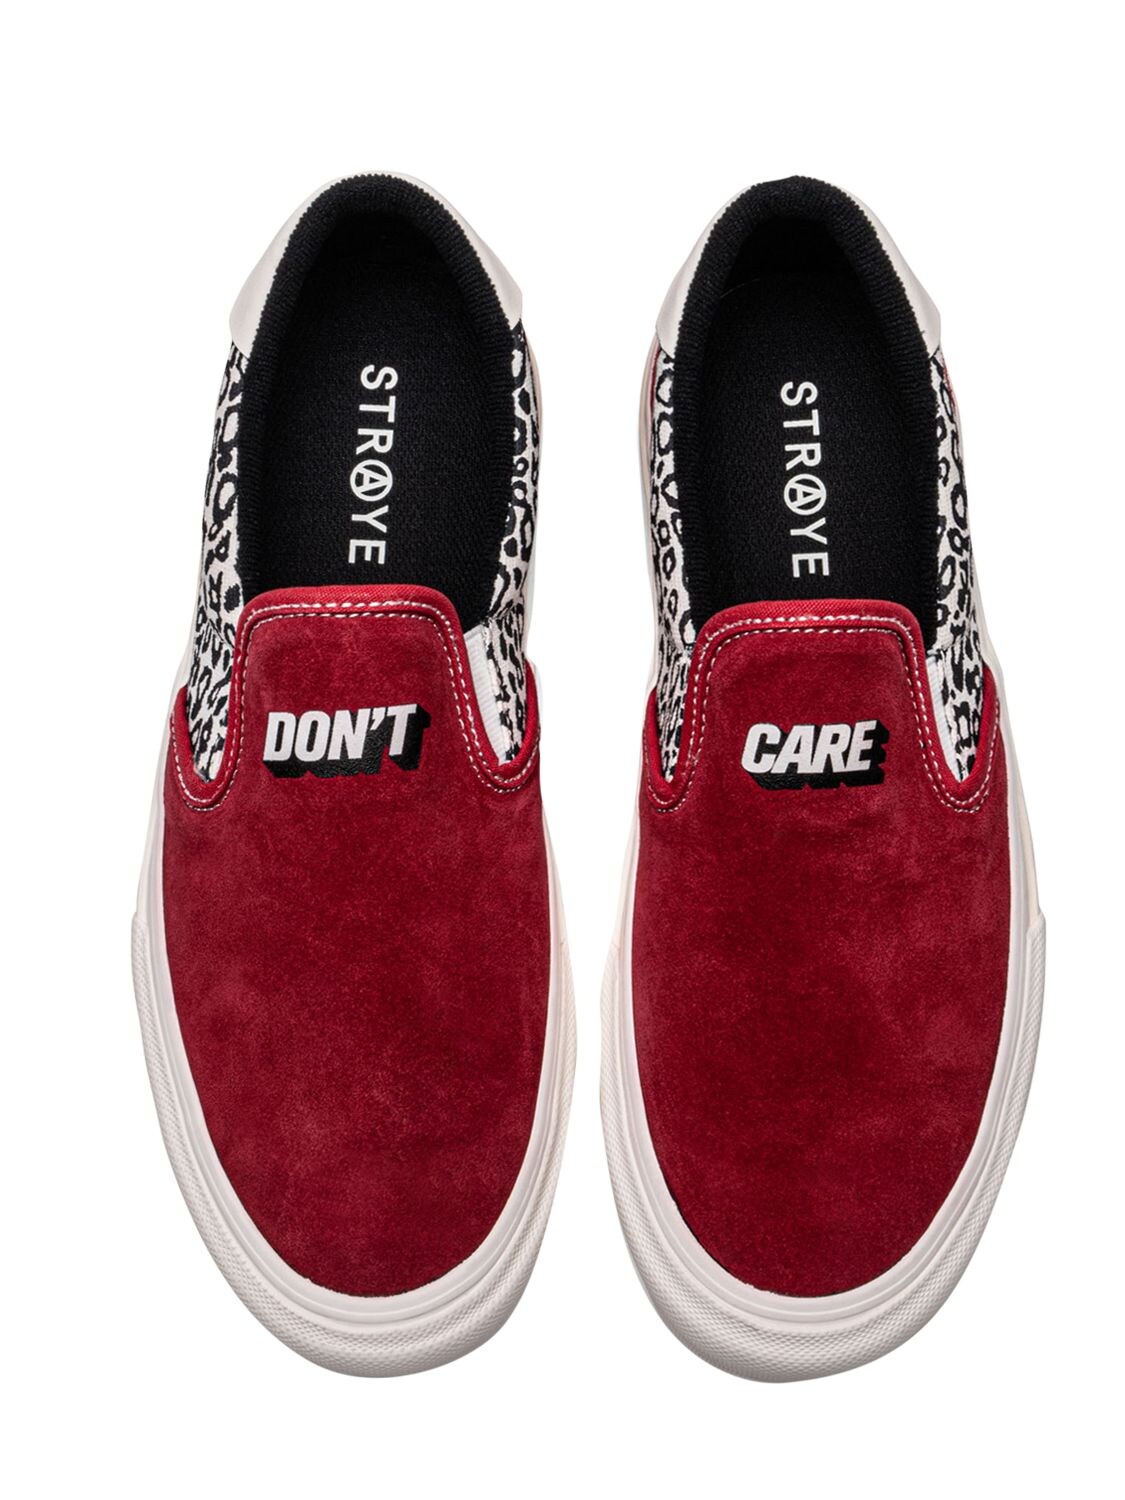 Straye Ventura Don't Care Suede Sneakers In Red,multi